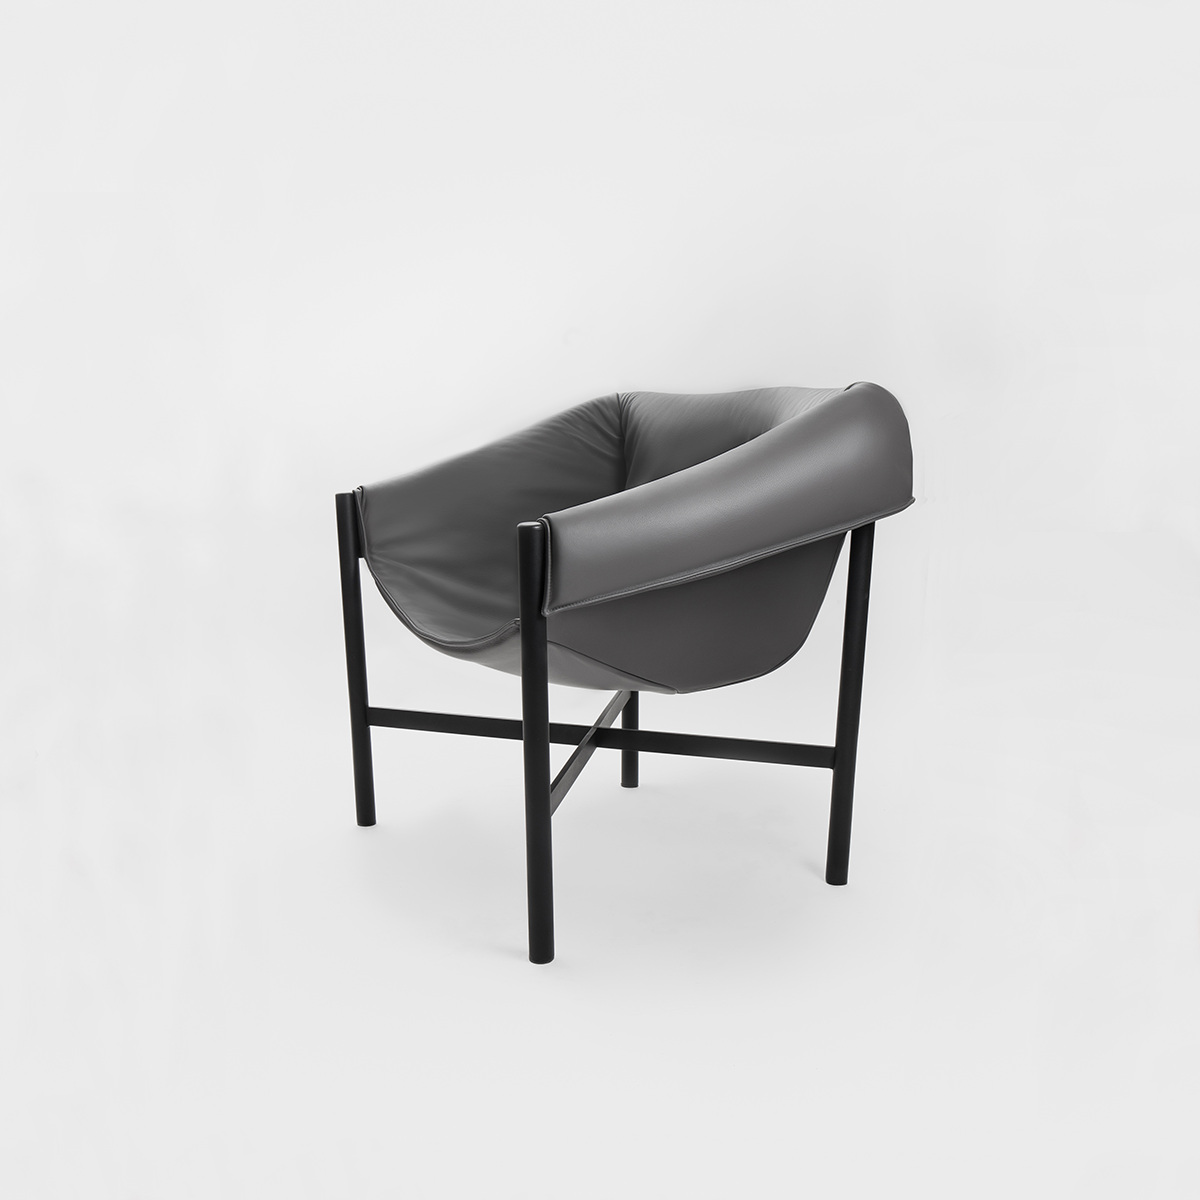 Falstaff armchair in anthracite by Stefan Diez for DANTE - Goods and Bads